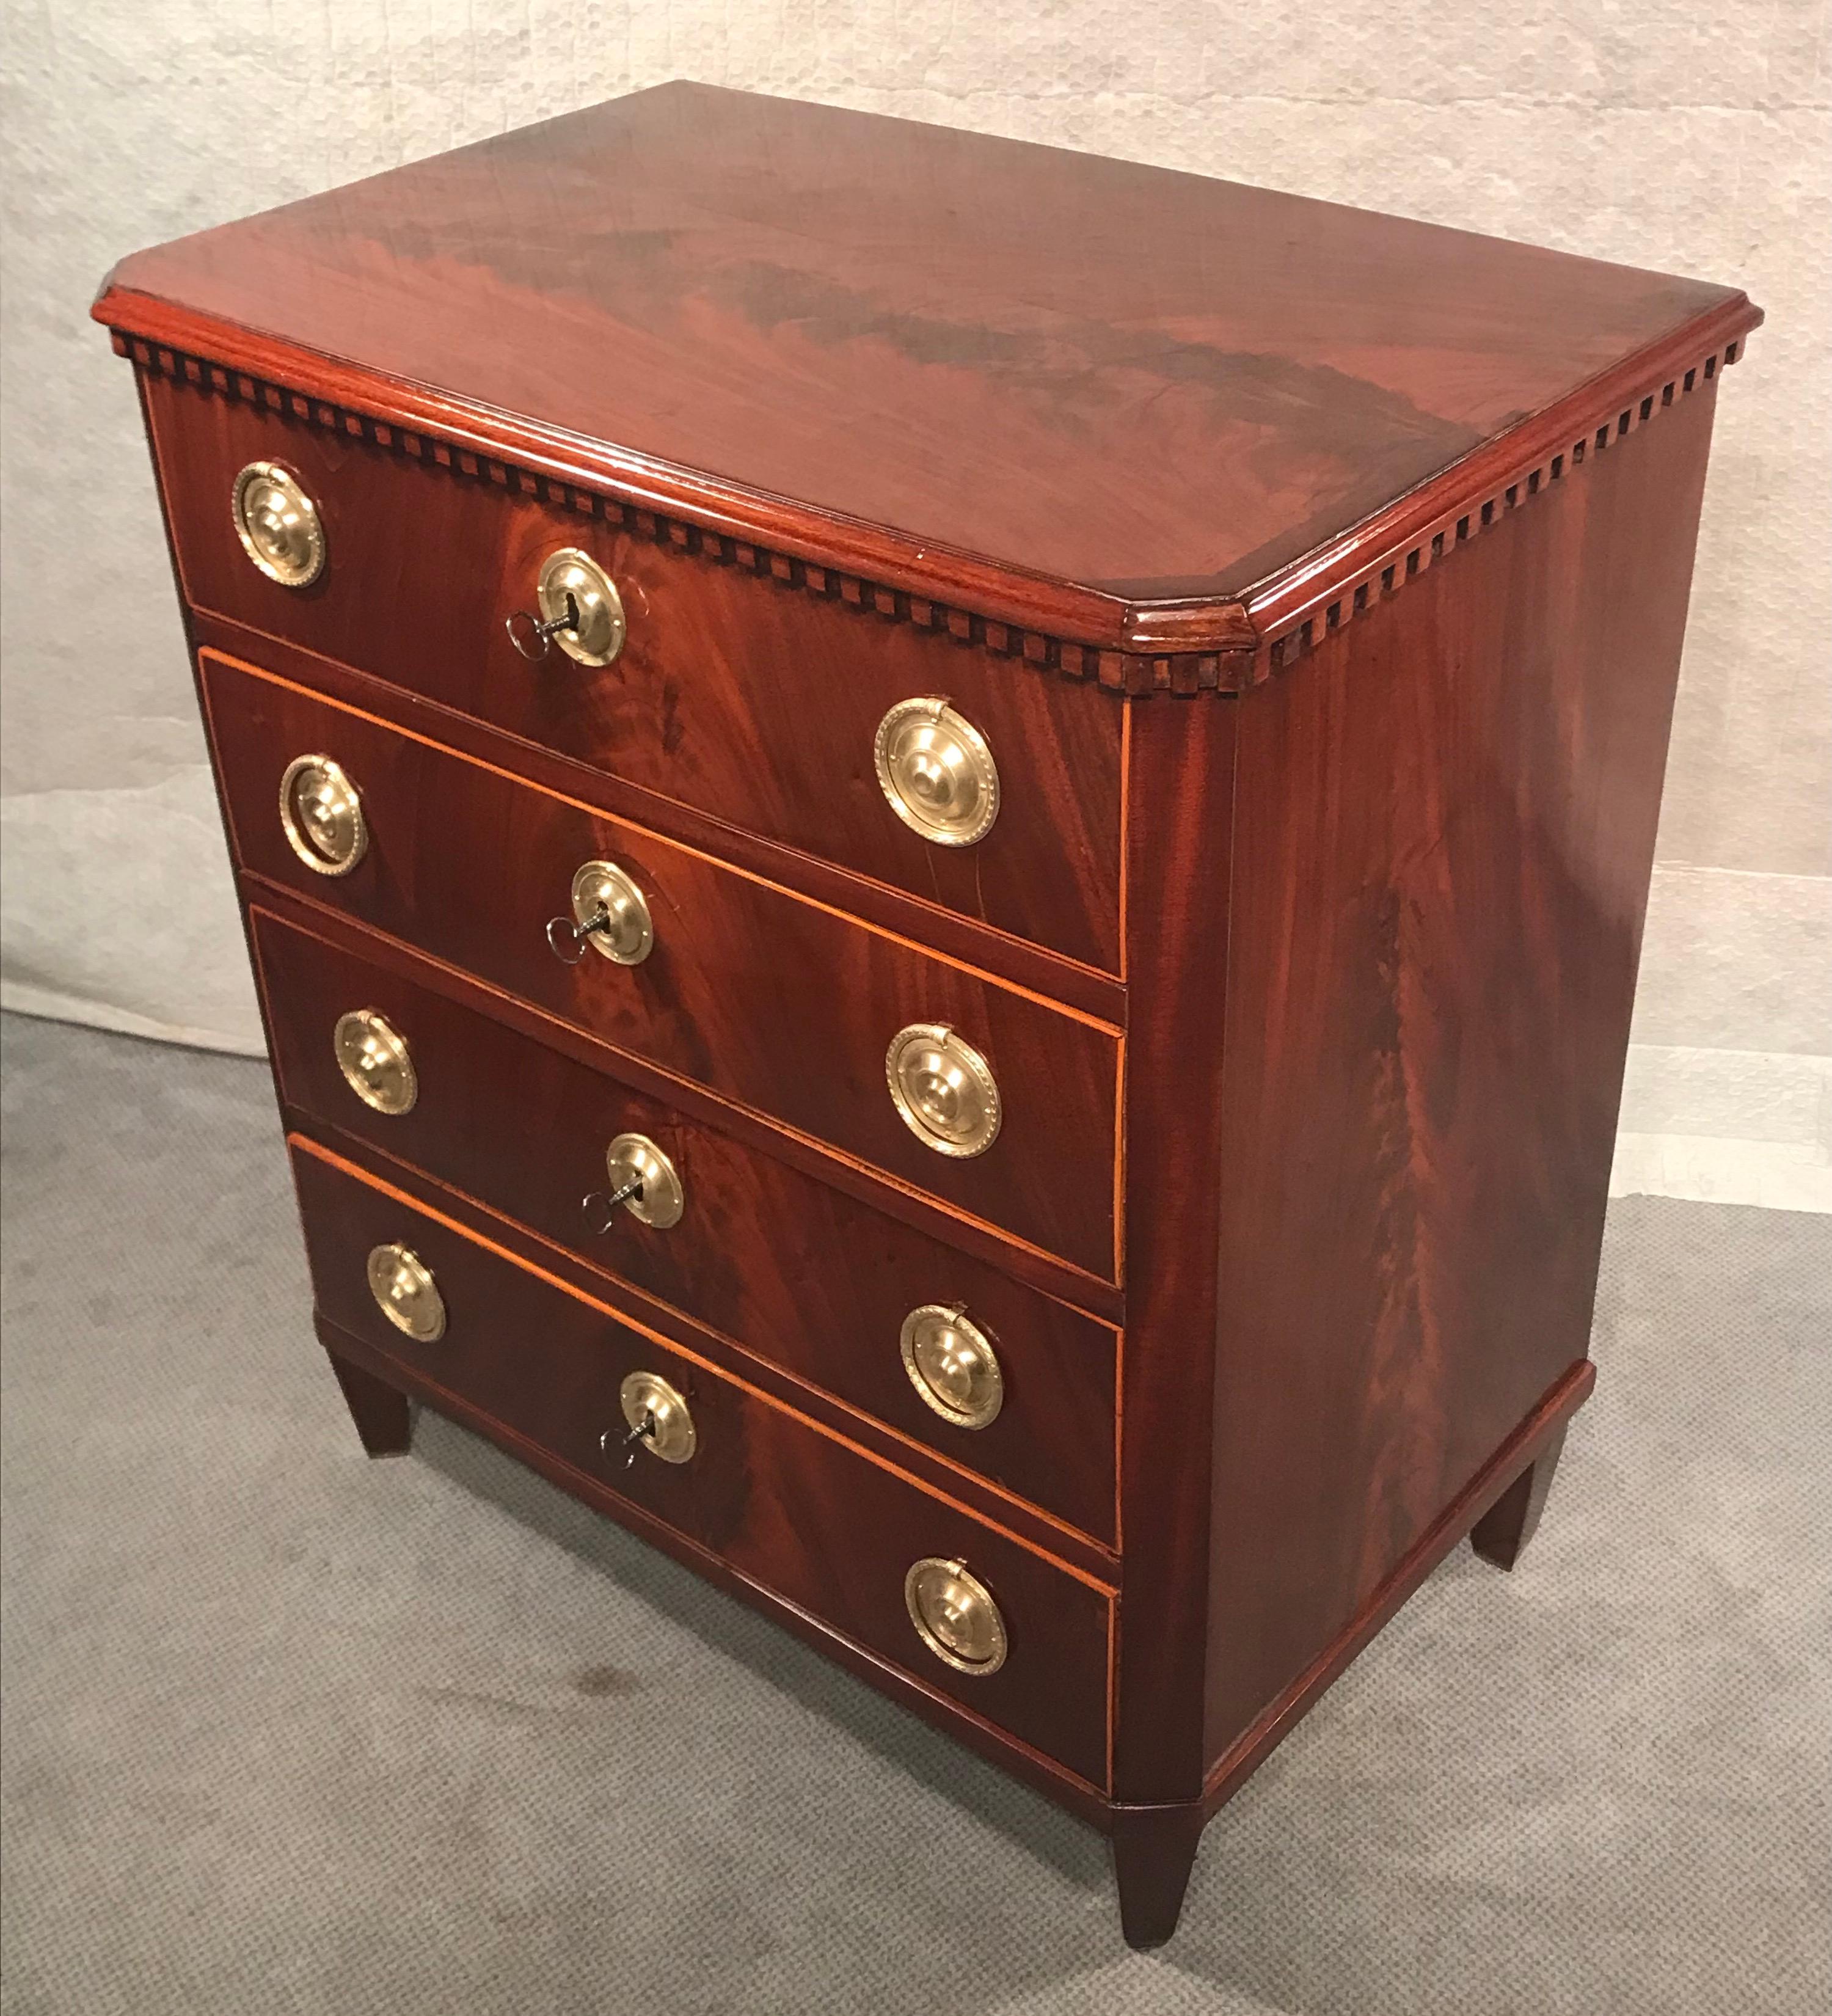 Neoclassical Chest of Drawers, Northern Germany around 1800 In Good Condition For Sale In Belmont, MA